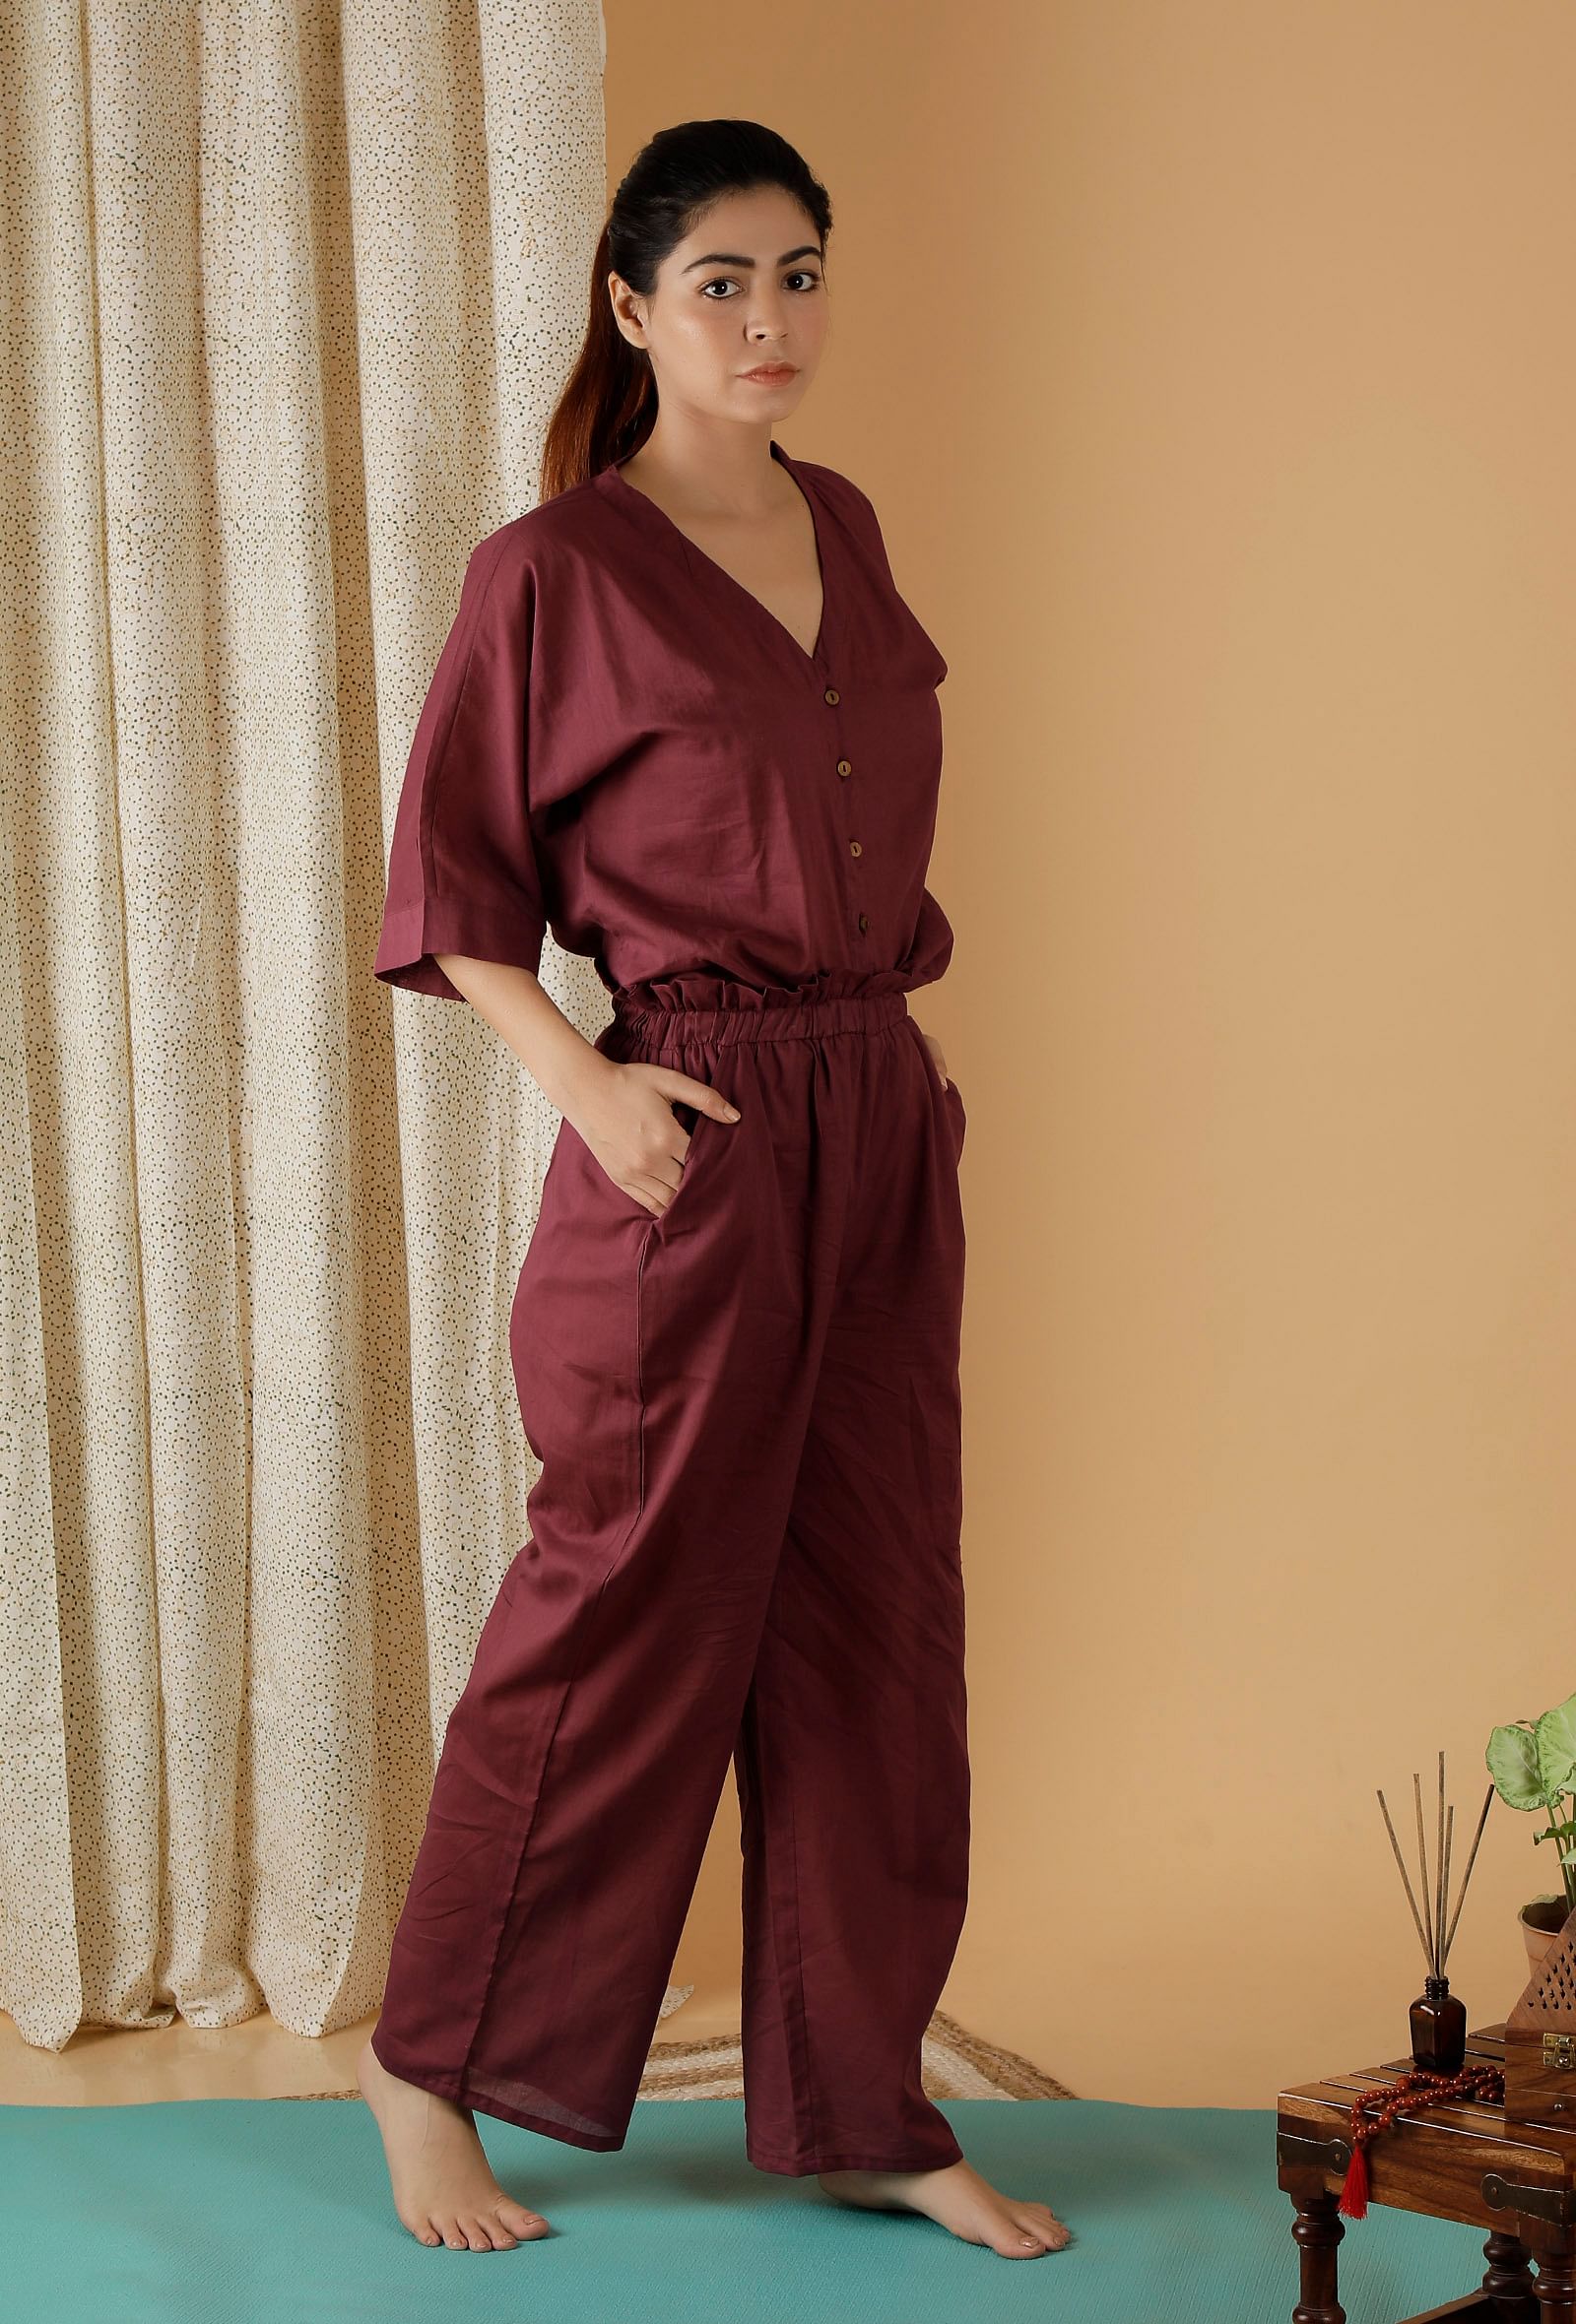 Wine Crinkled Button Down Shirt With Pants Casual CoOrd  ADFYSNCRS587   Cilorycom